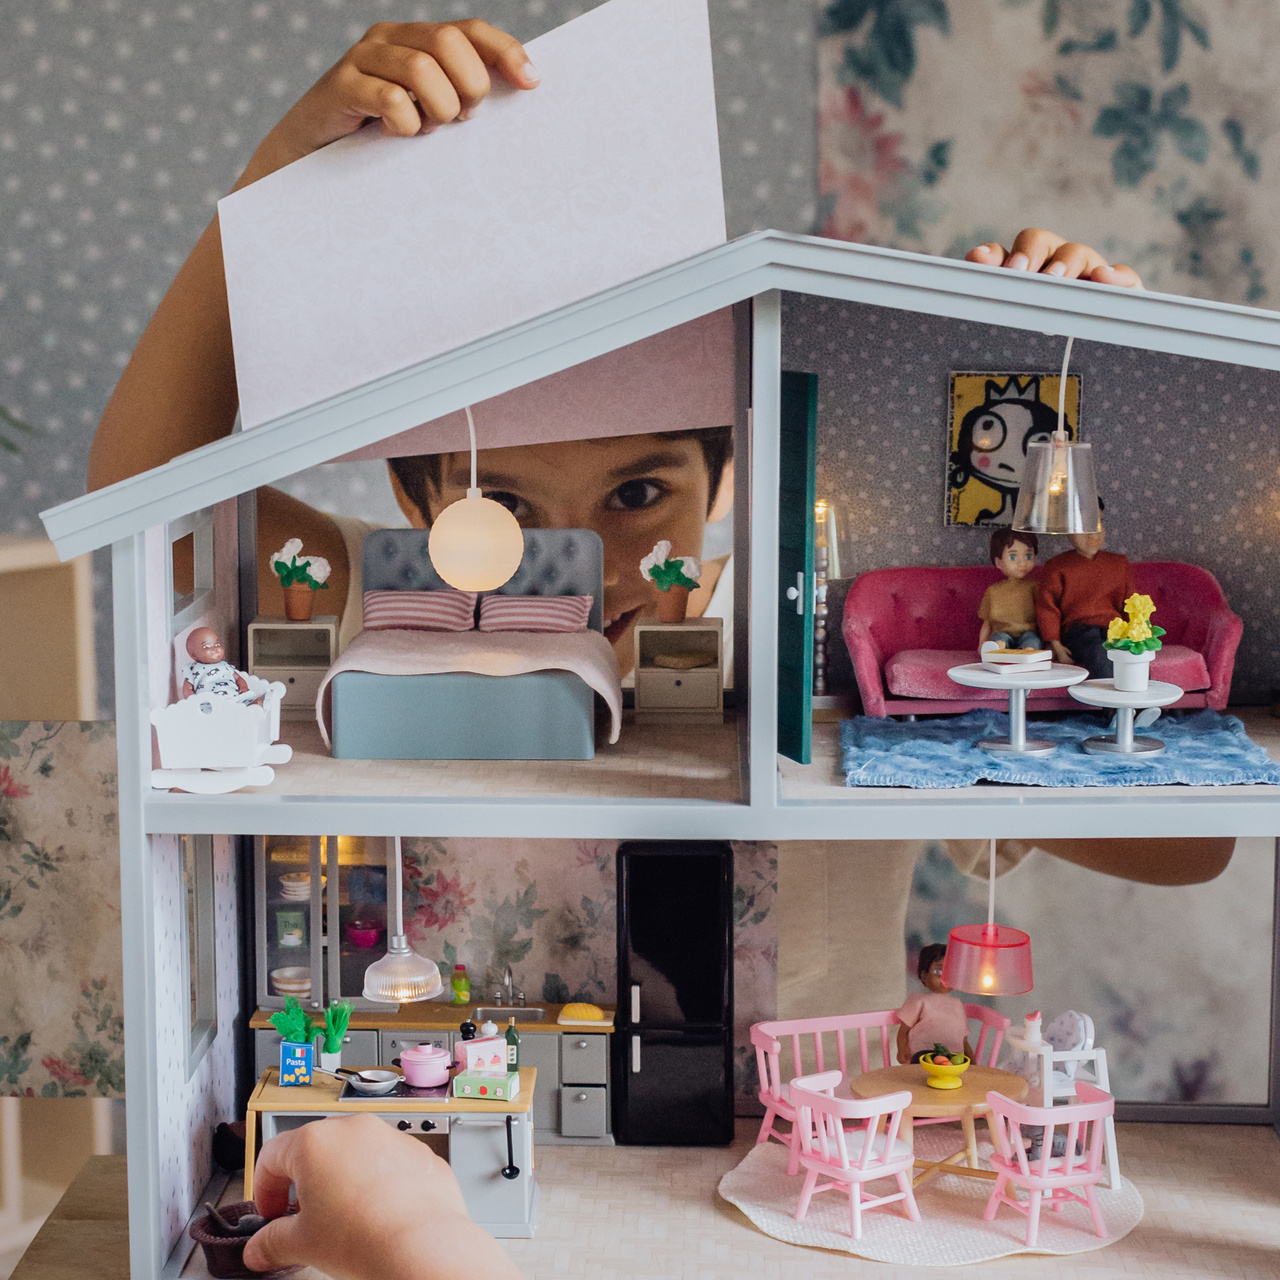 Doll house furniture & doll house accessories lundby dollhouse furniture living room set pink